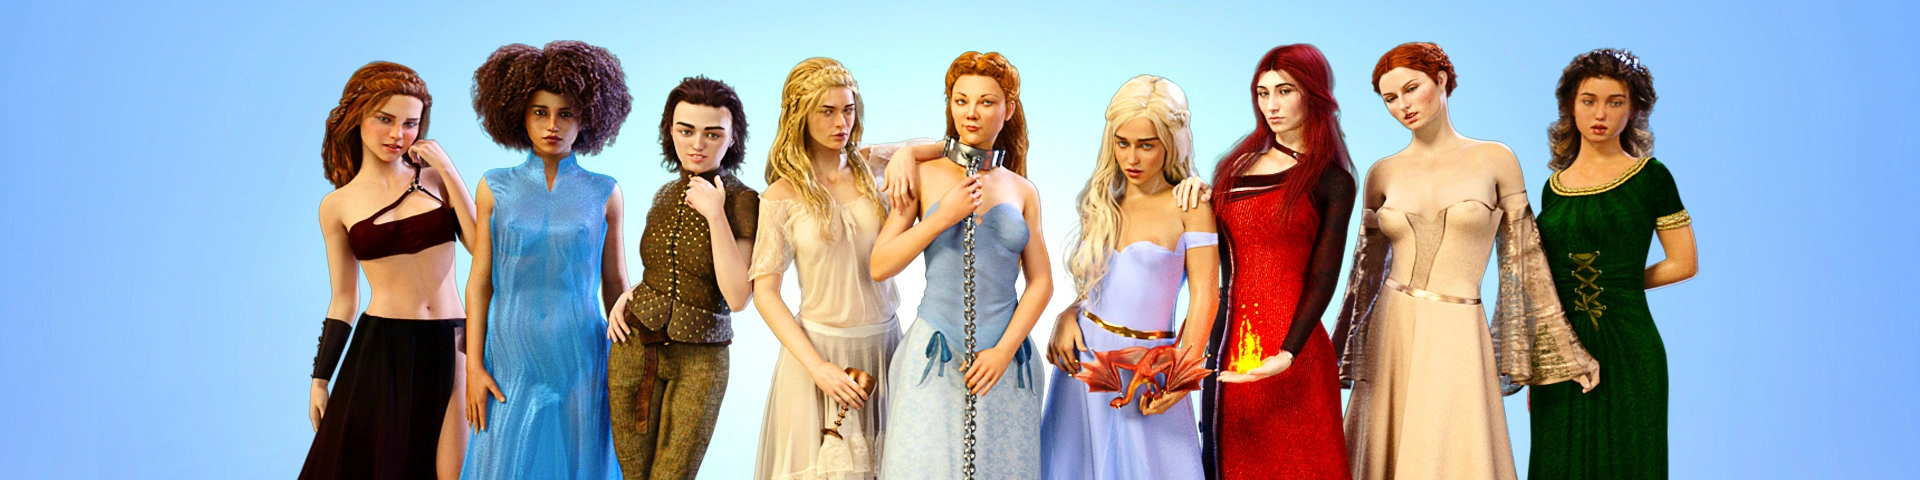 Whores of Thrones [v0.9a] main image